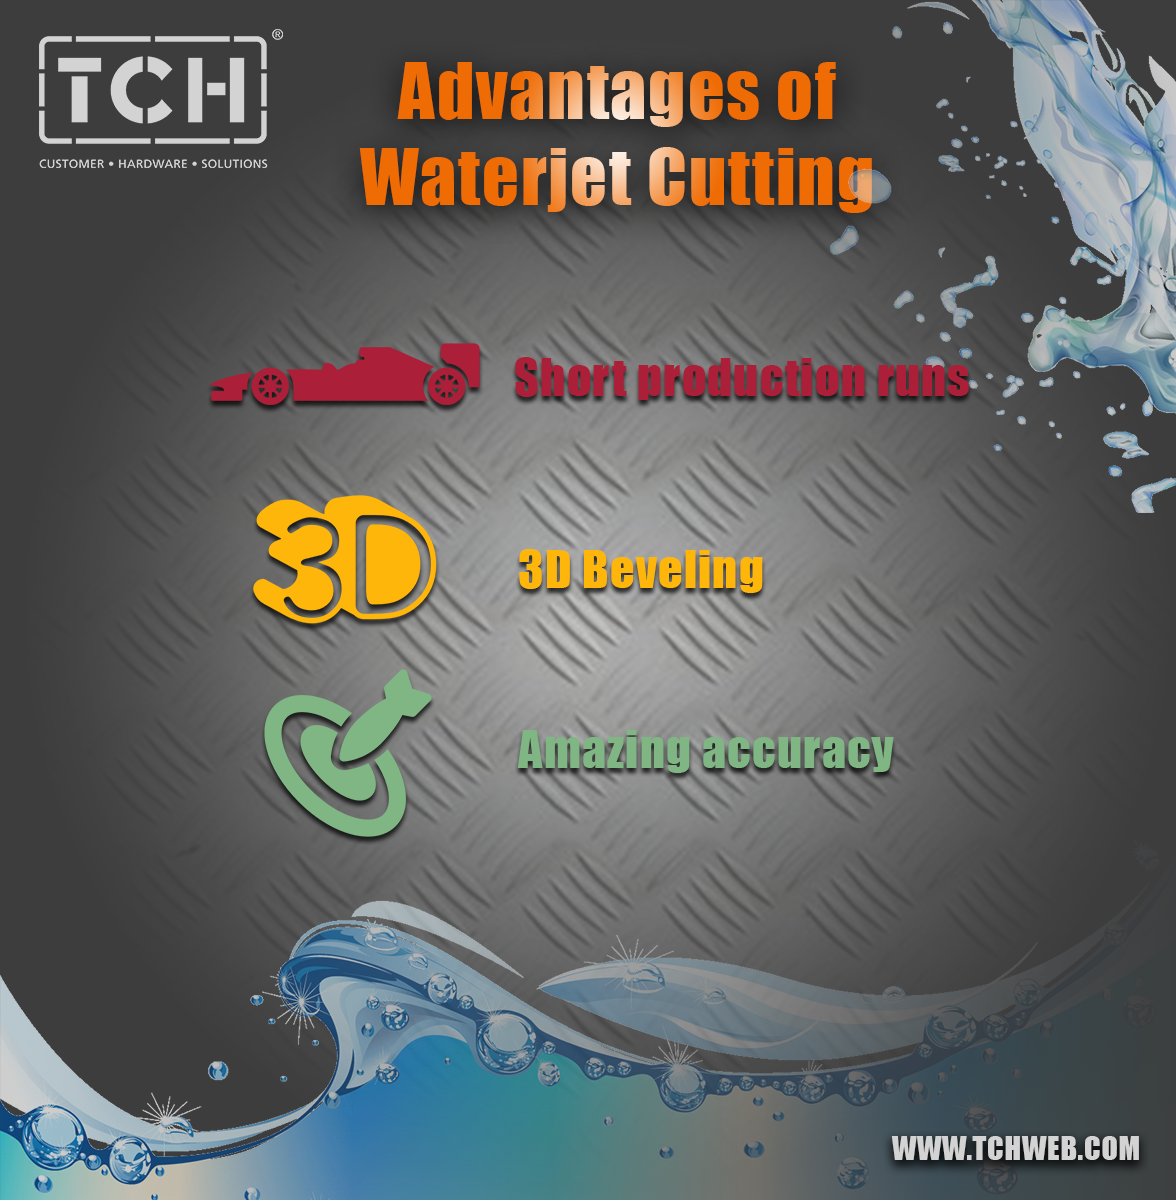 7 Advantages of Waterjet Cutting